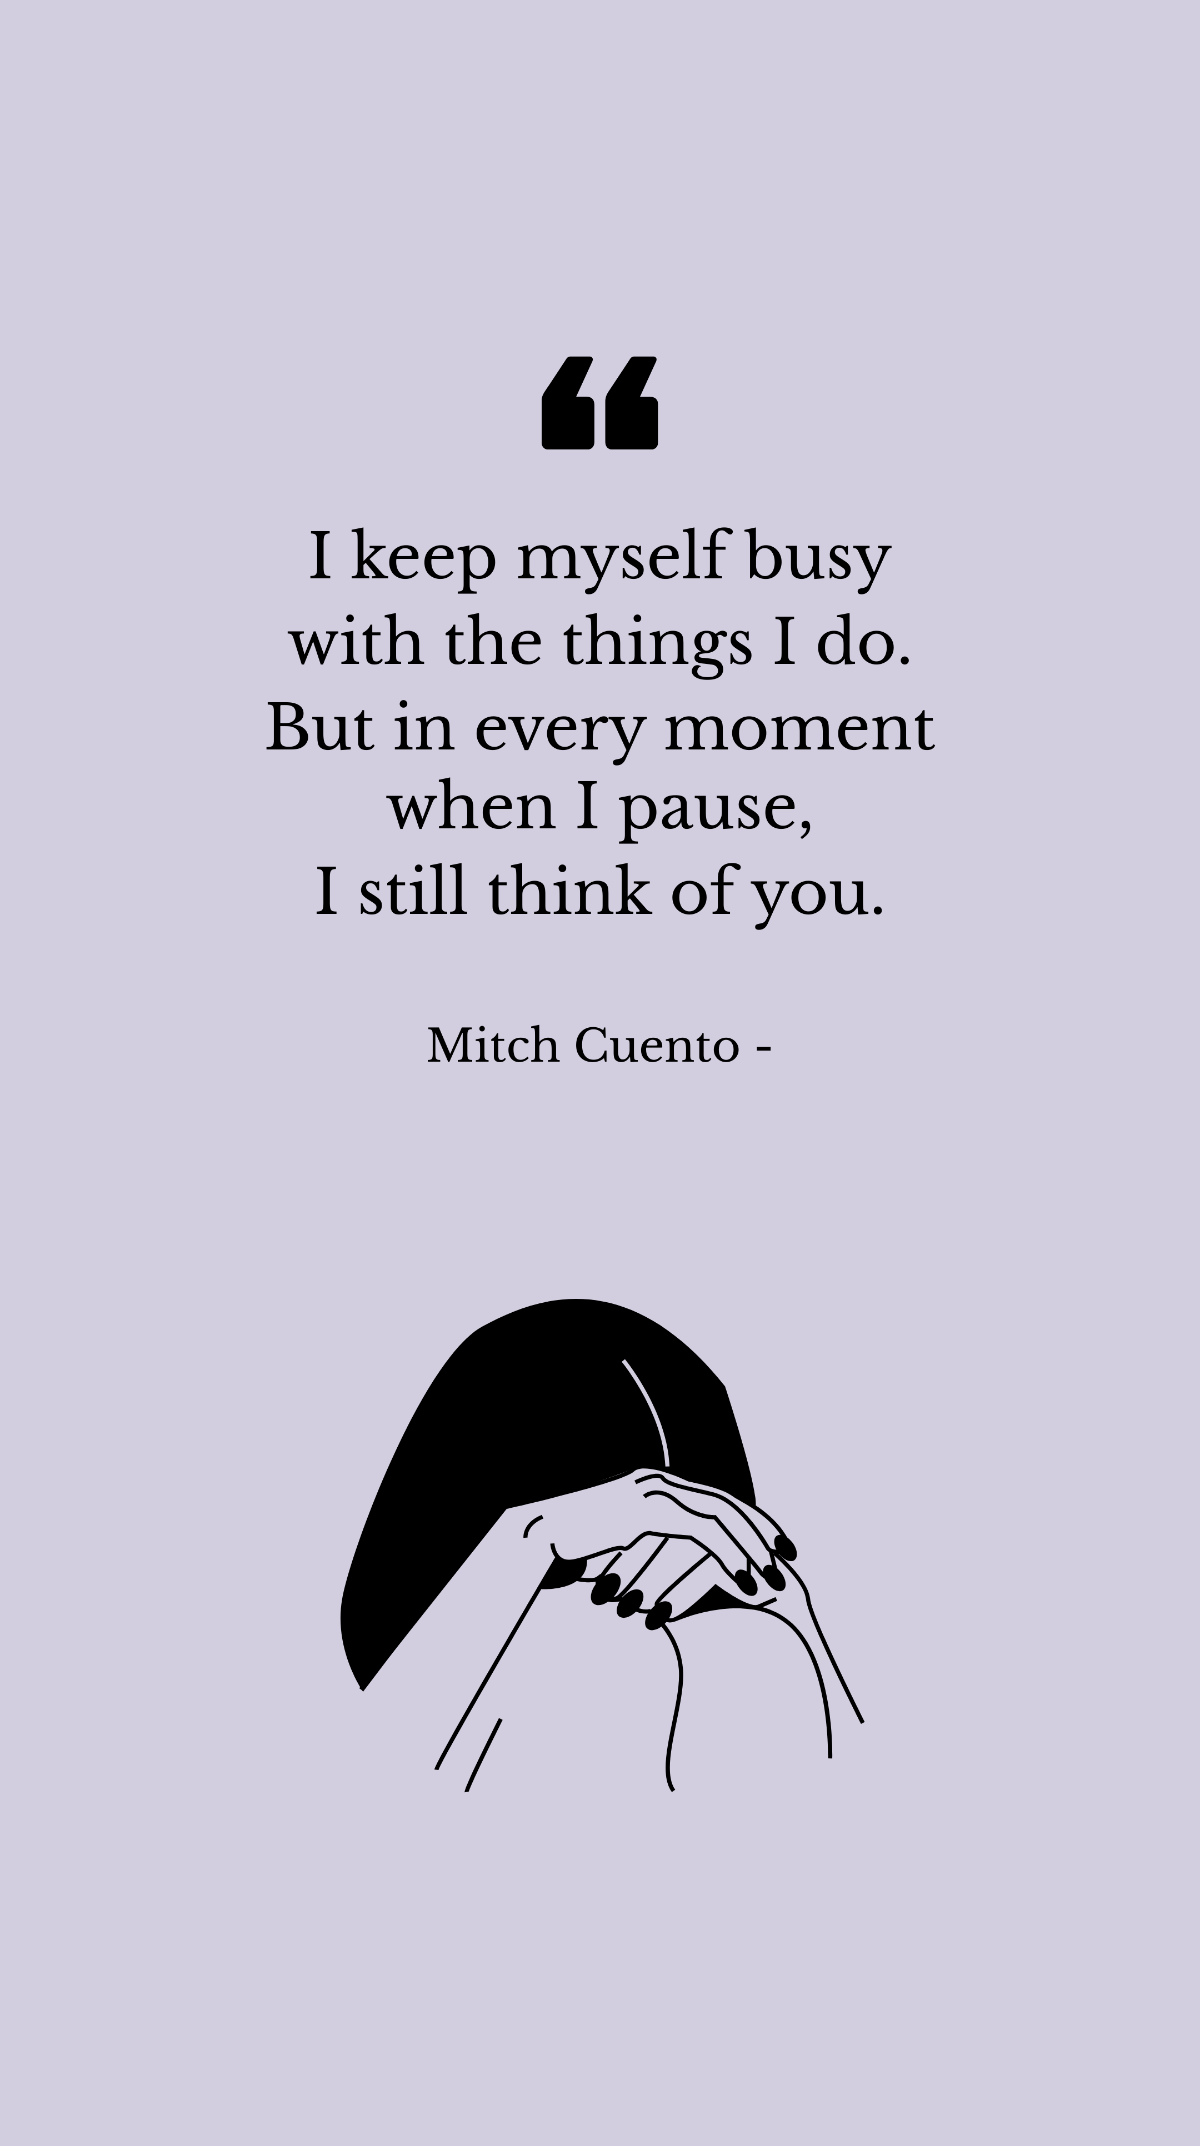 Free Mitch Cuento - I keep myself busy with the things I do. But in every moment when I pause, I still think of you. Template